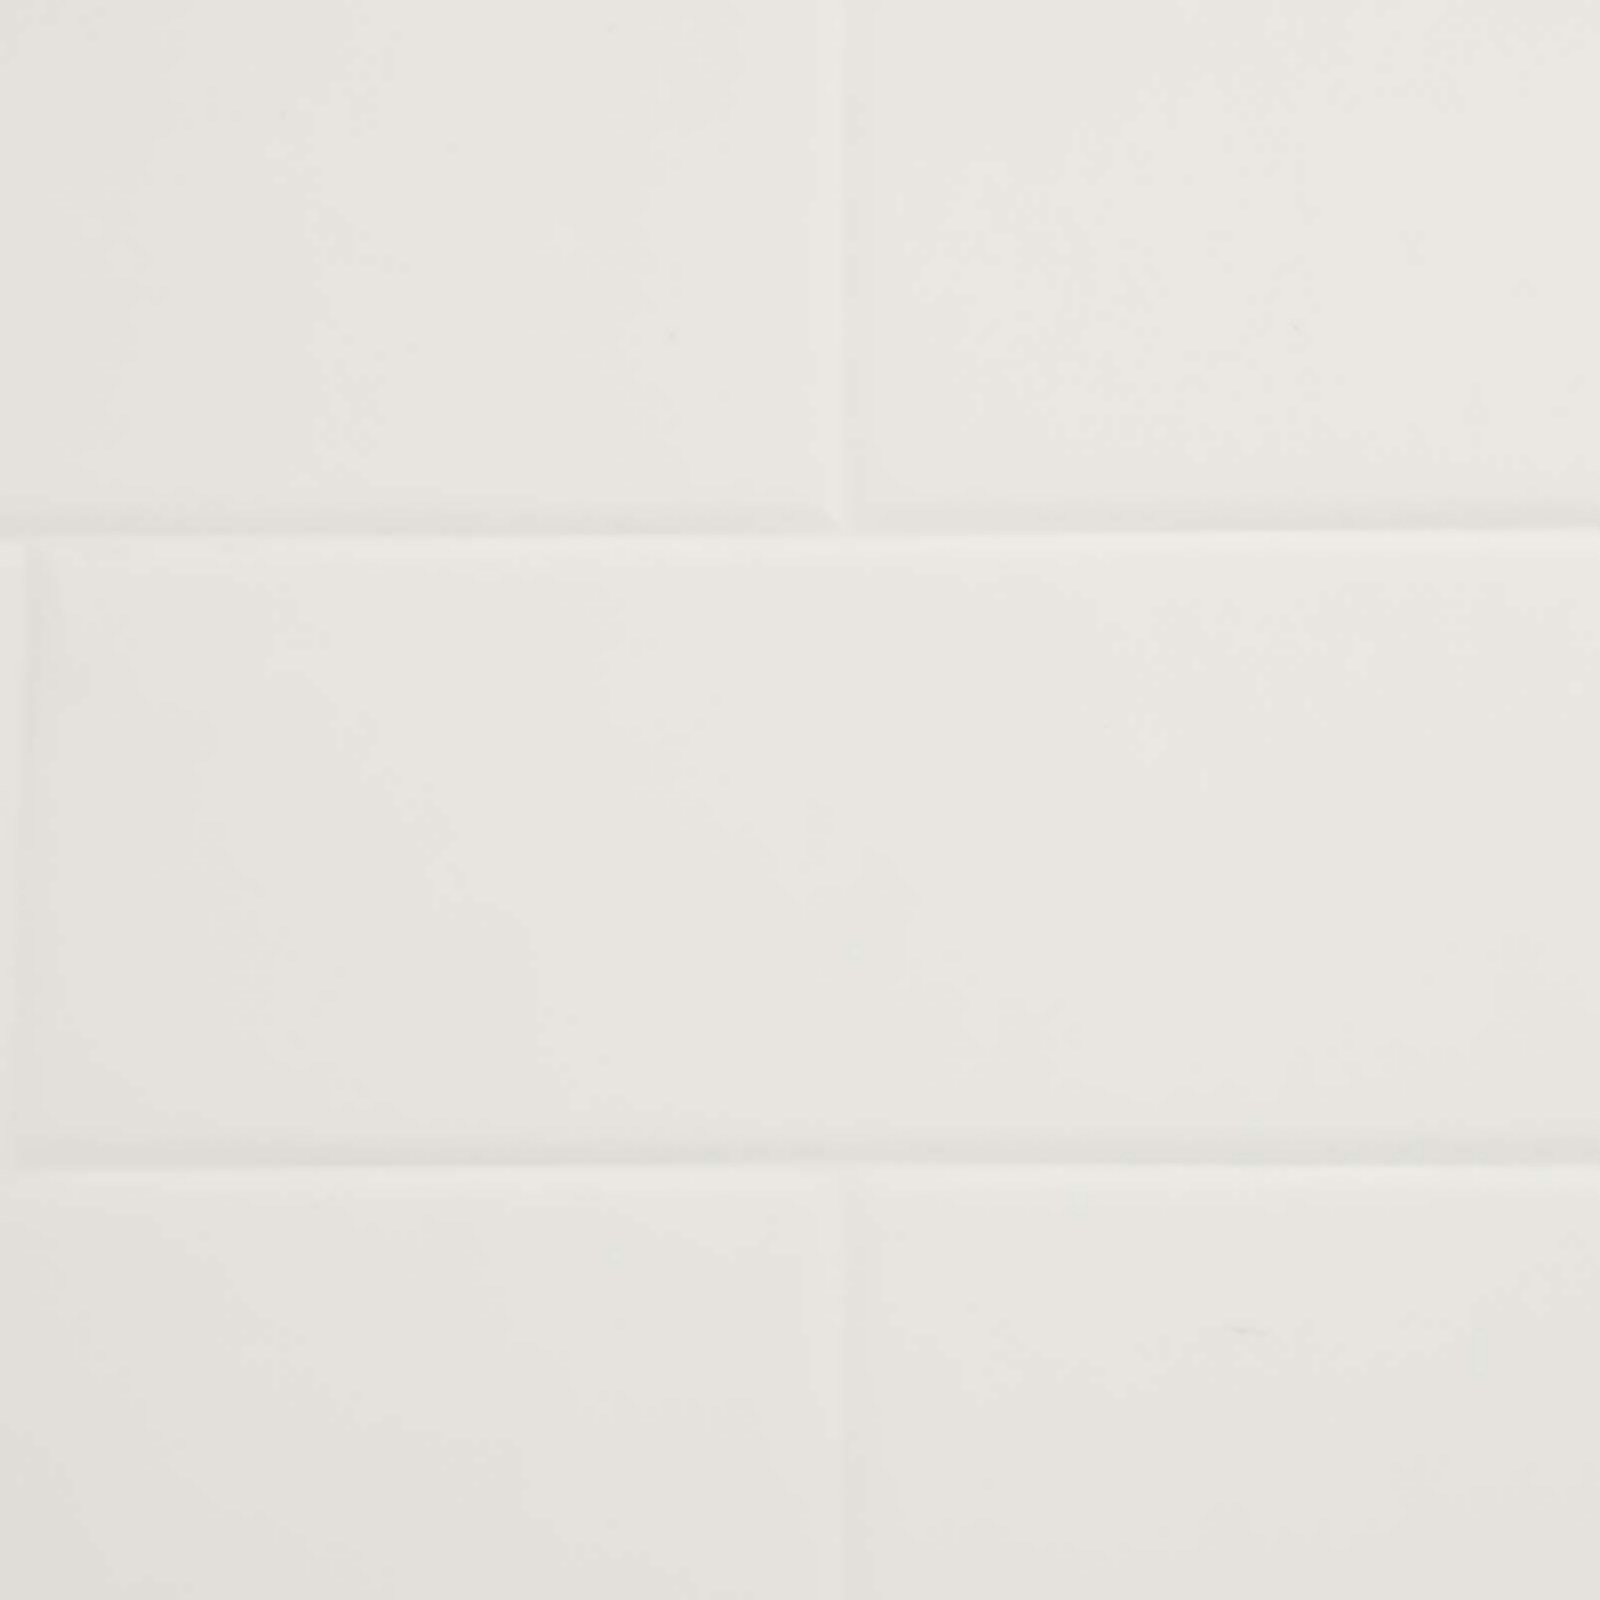 Photo of Wetwall Pure White - 1220mm - Vertical Panel - Composite